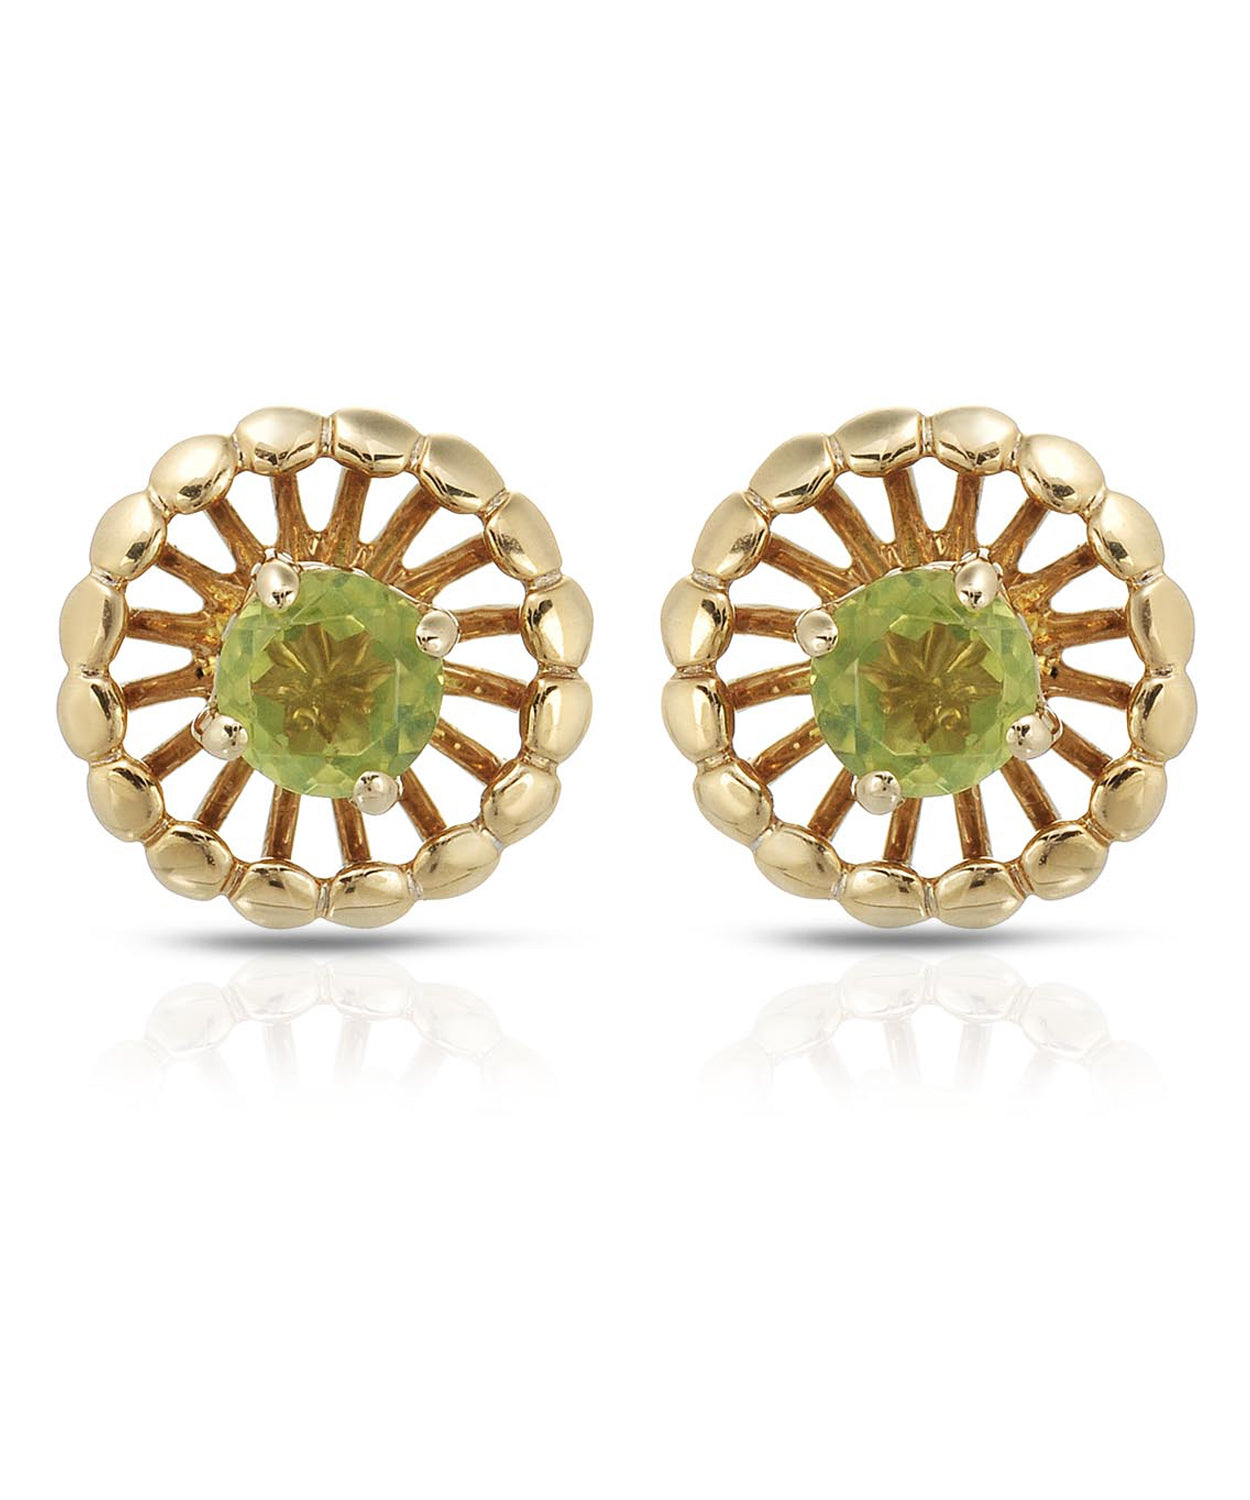 0.56 ctw Natural Lime Peridot 14k Yellow Gold Stud Earrings View 1